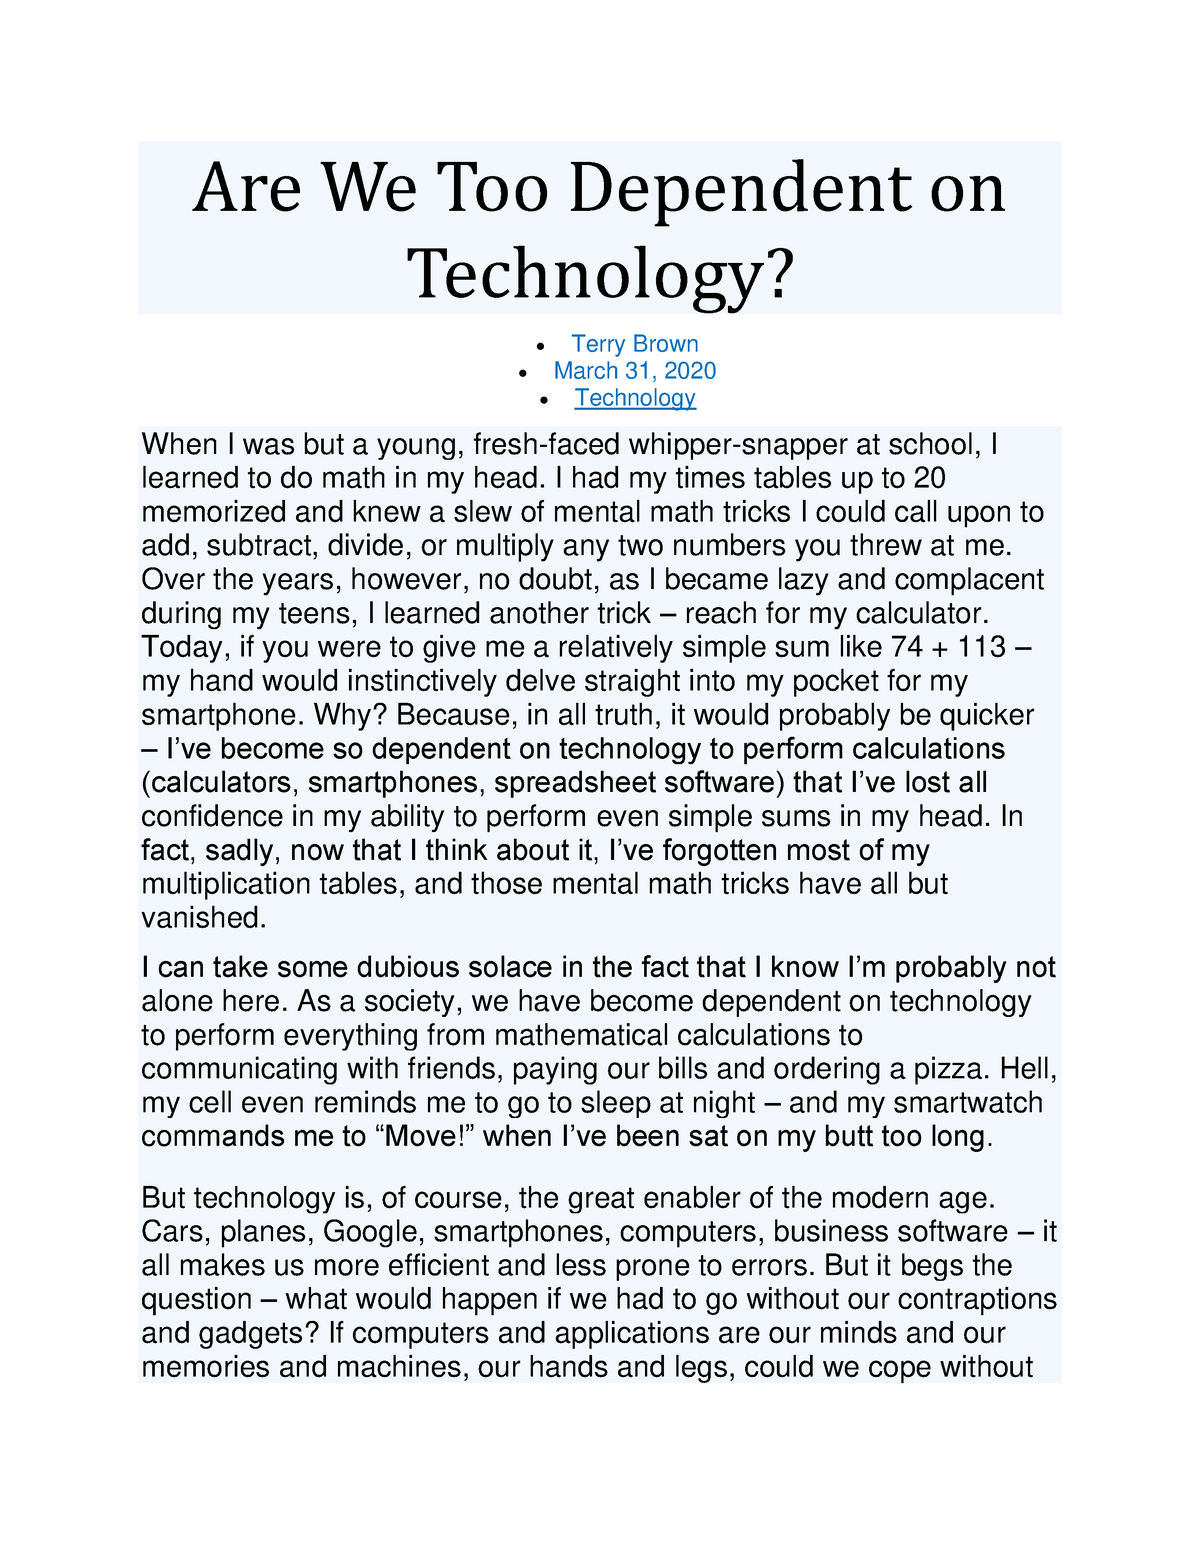 society is too dependent on technology essay